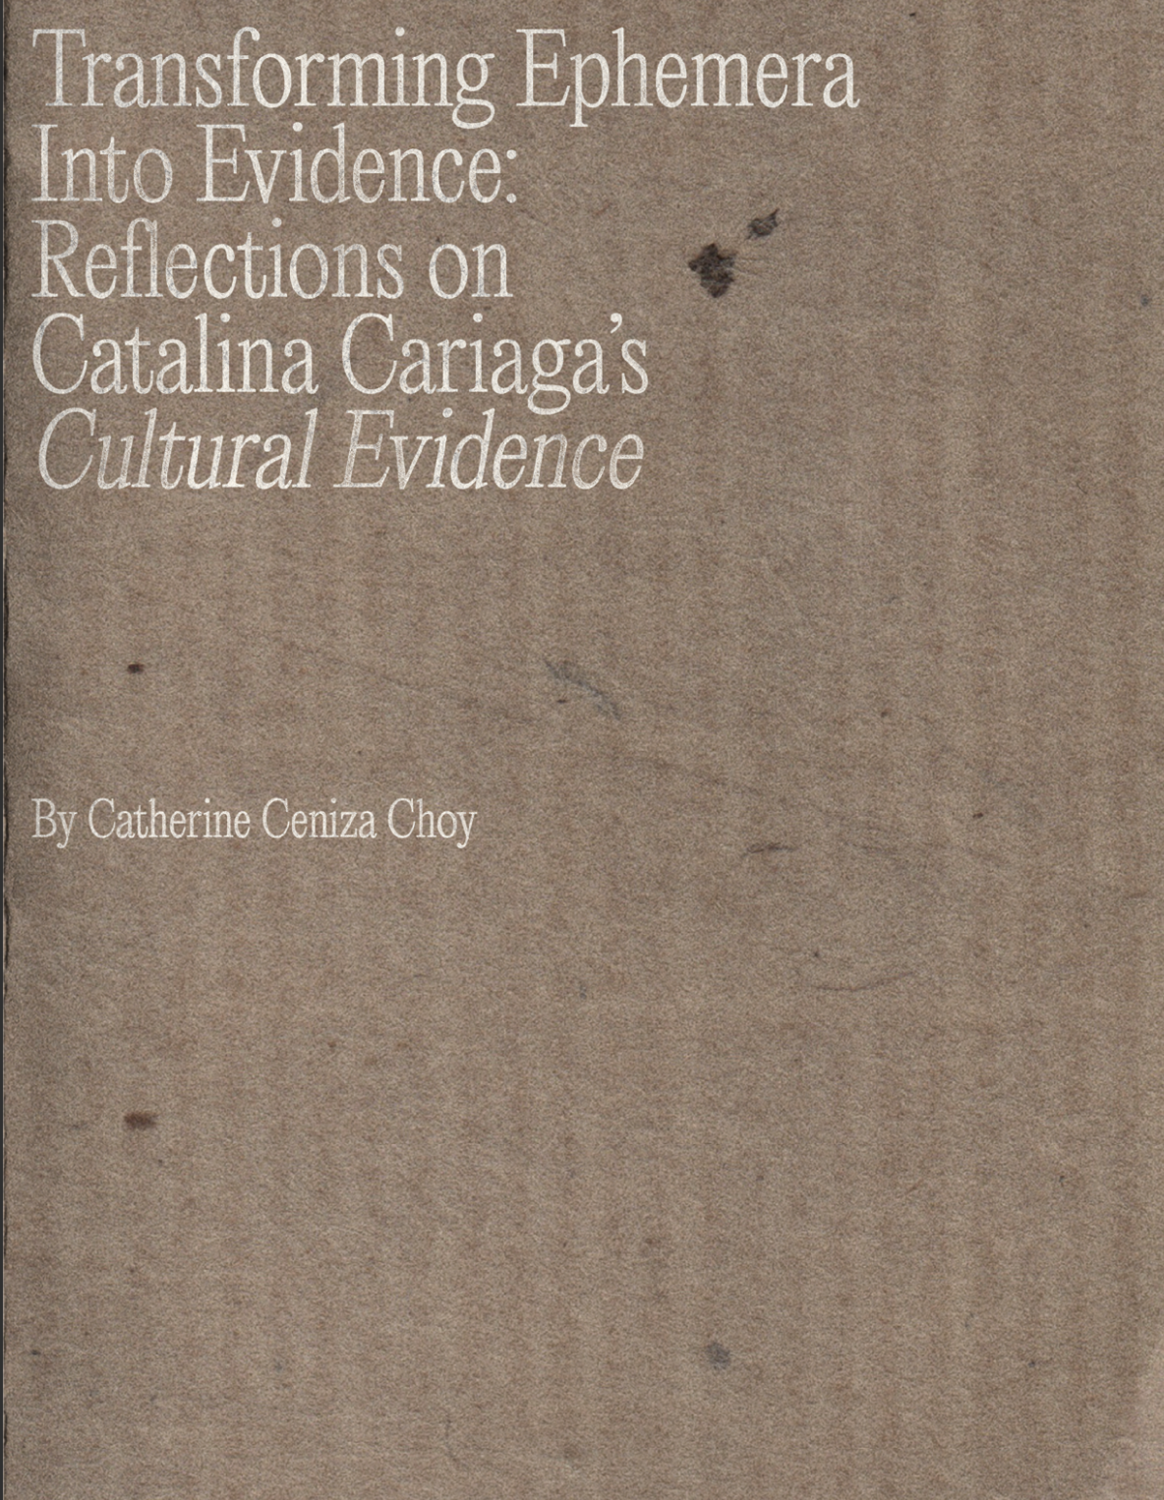 Notes on Cultural Evidence - Digital Catalogue